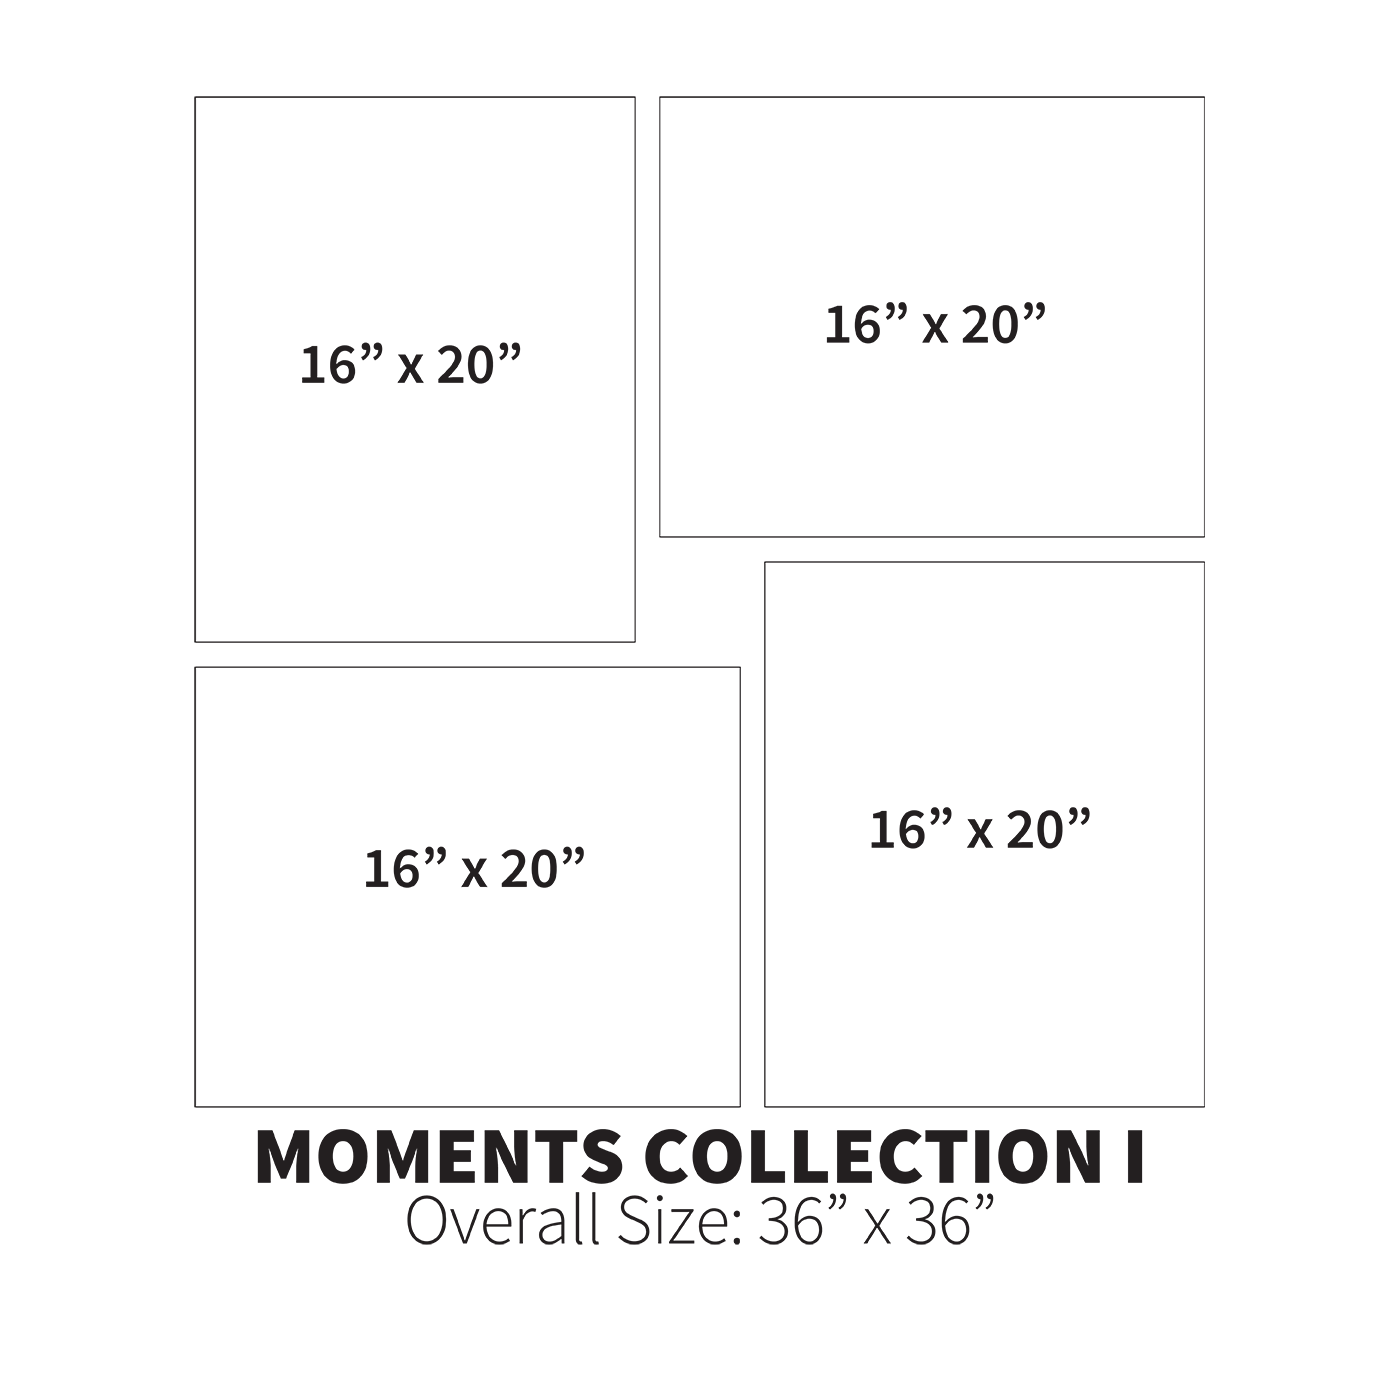 Moments Collection I (Overall Size: 36" x 36")